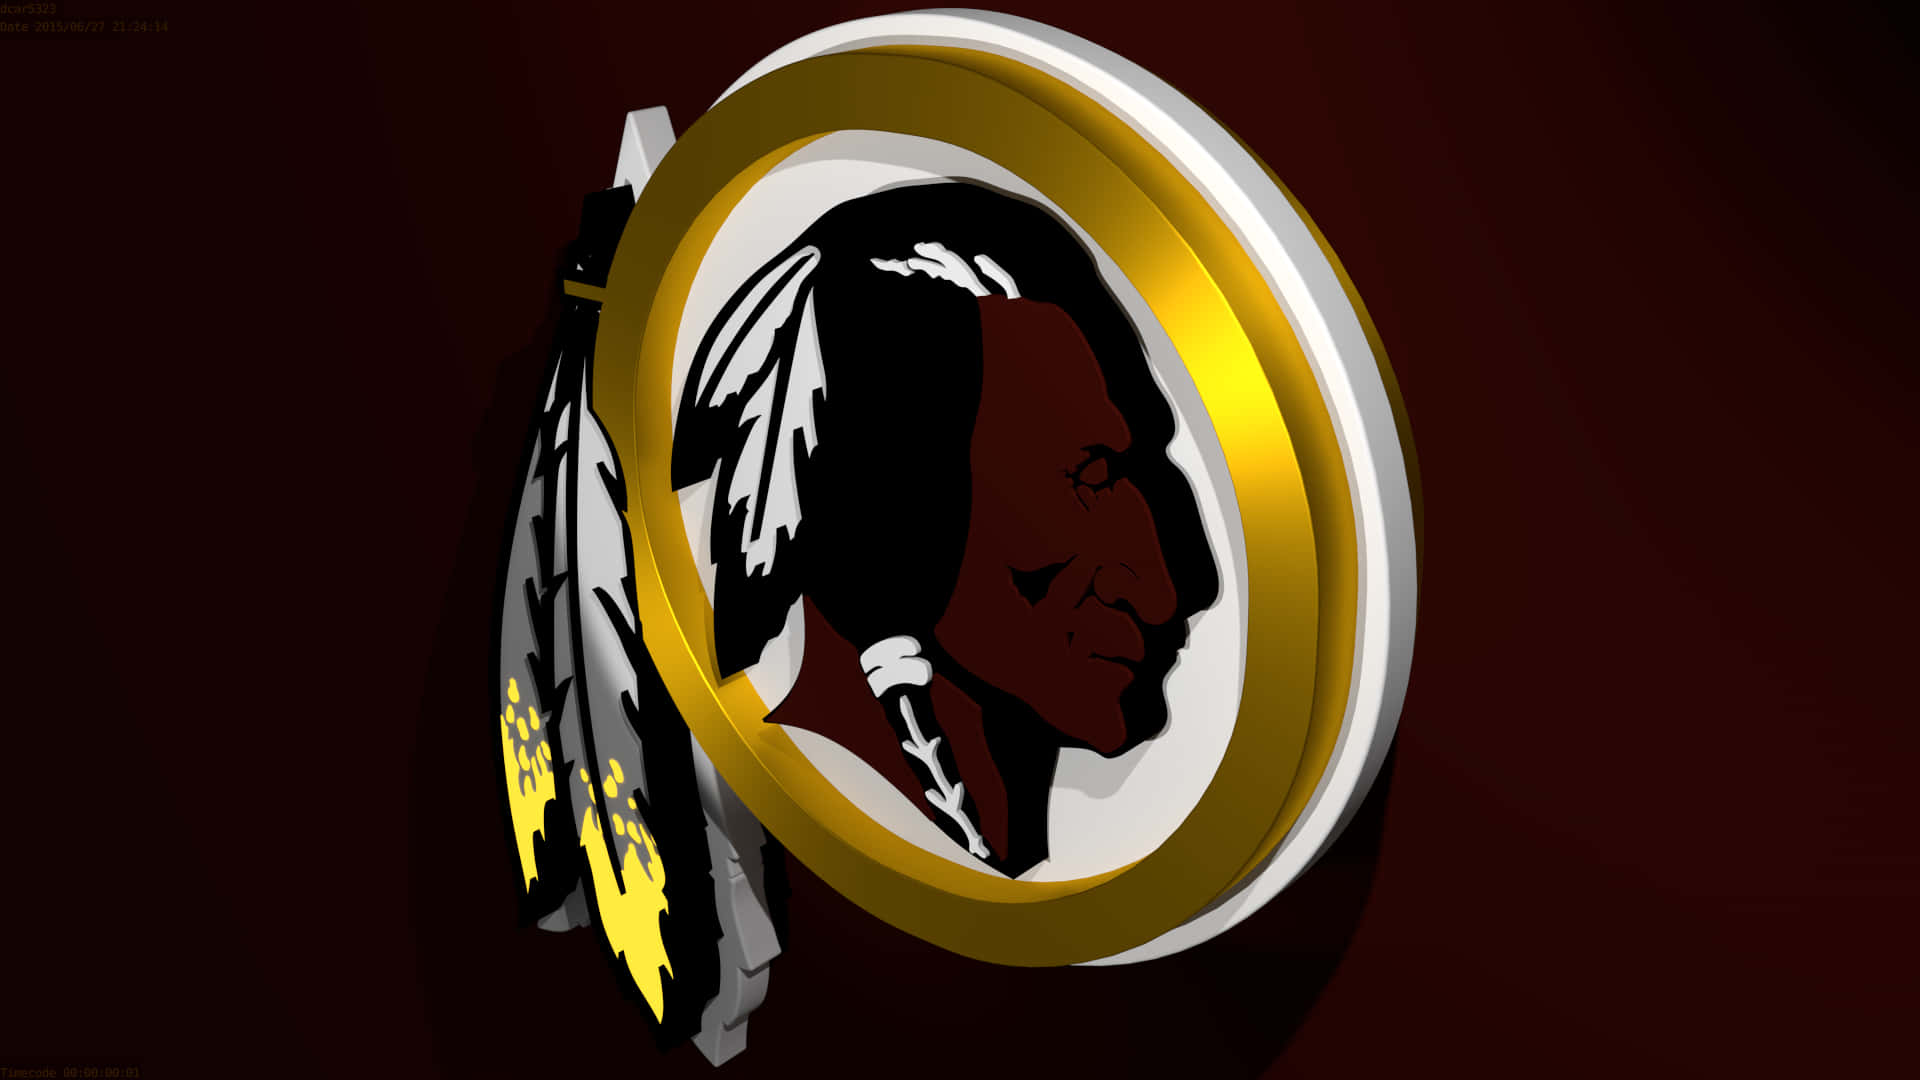 Washington Redskins Fans are Ready to Cheer on Their Favorite Team! Wallpaper